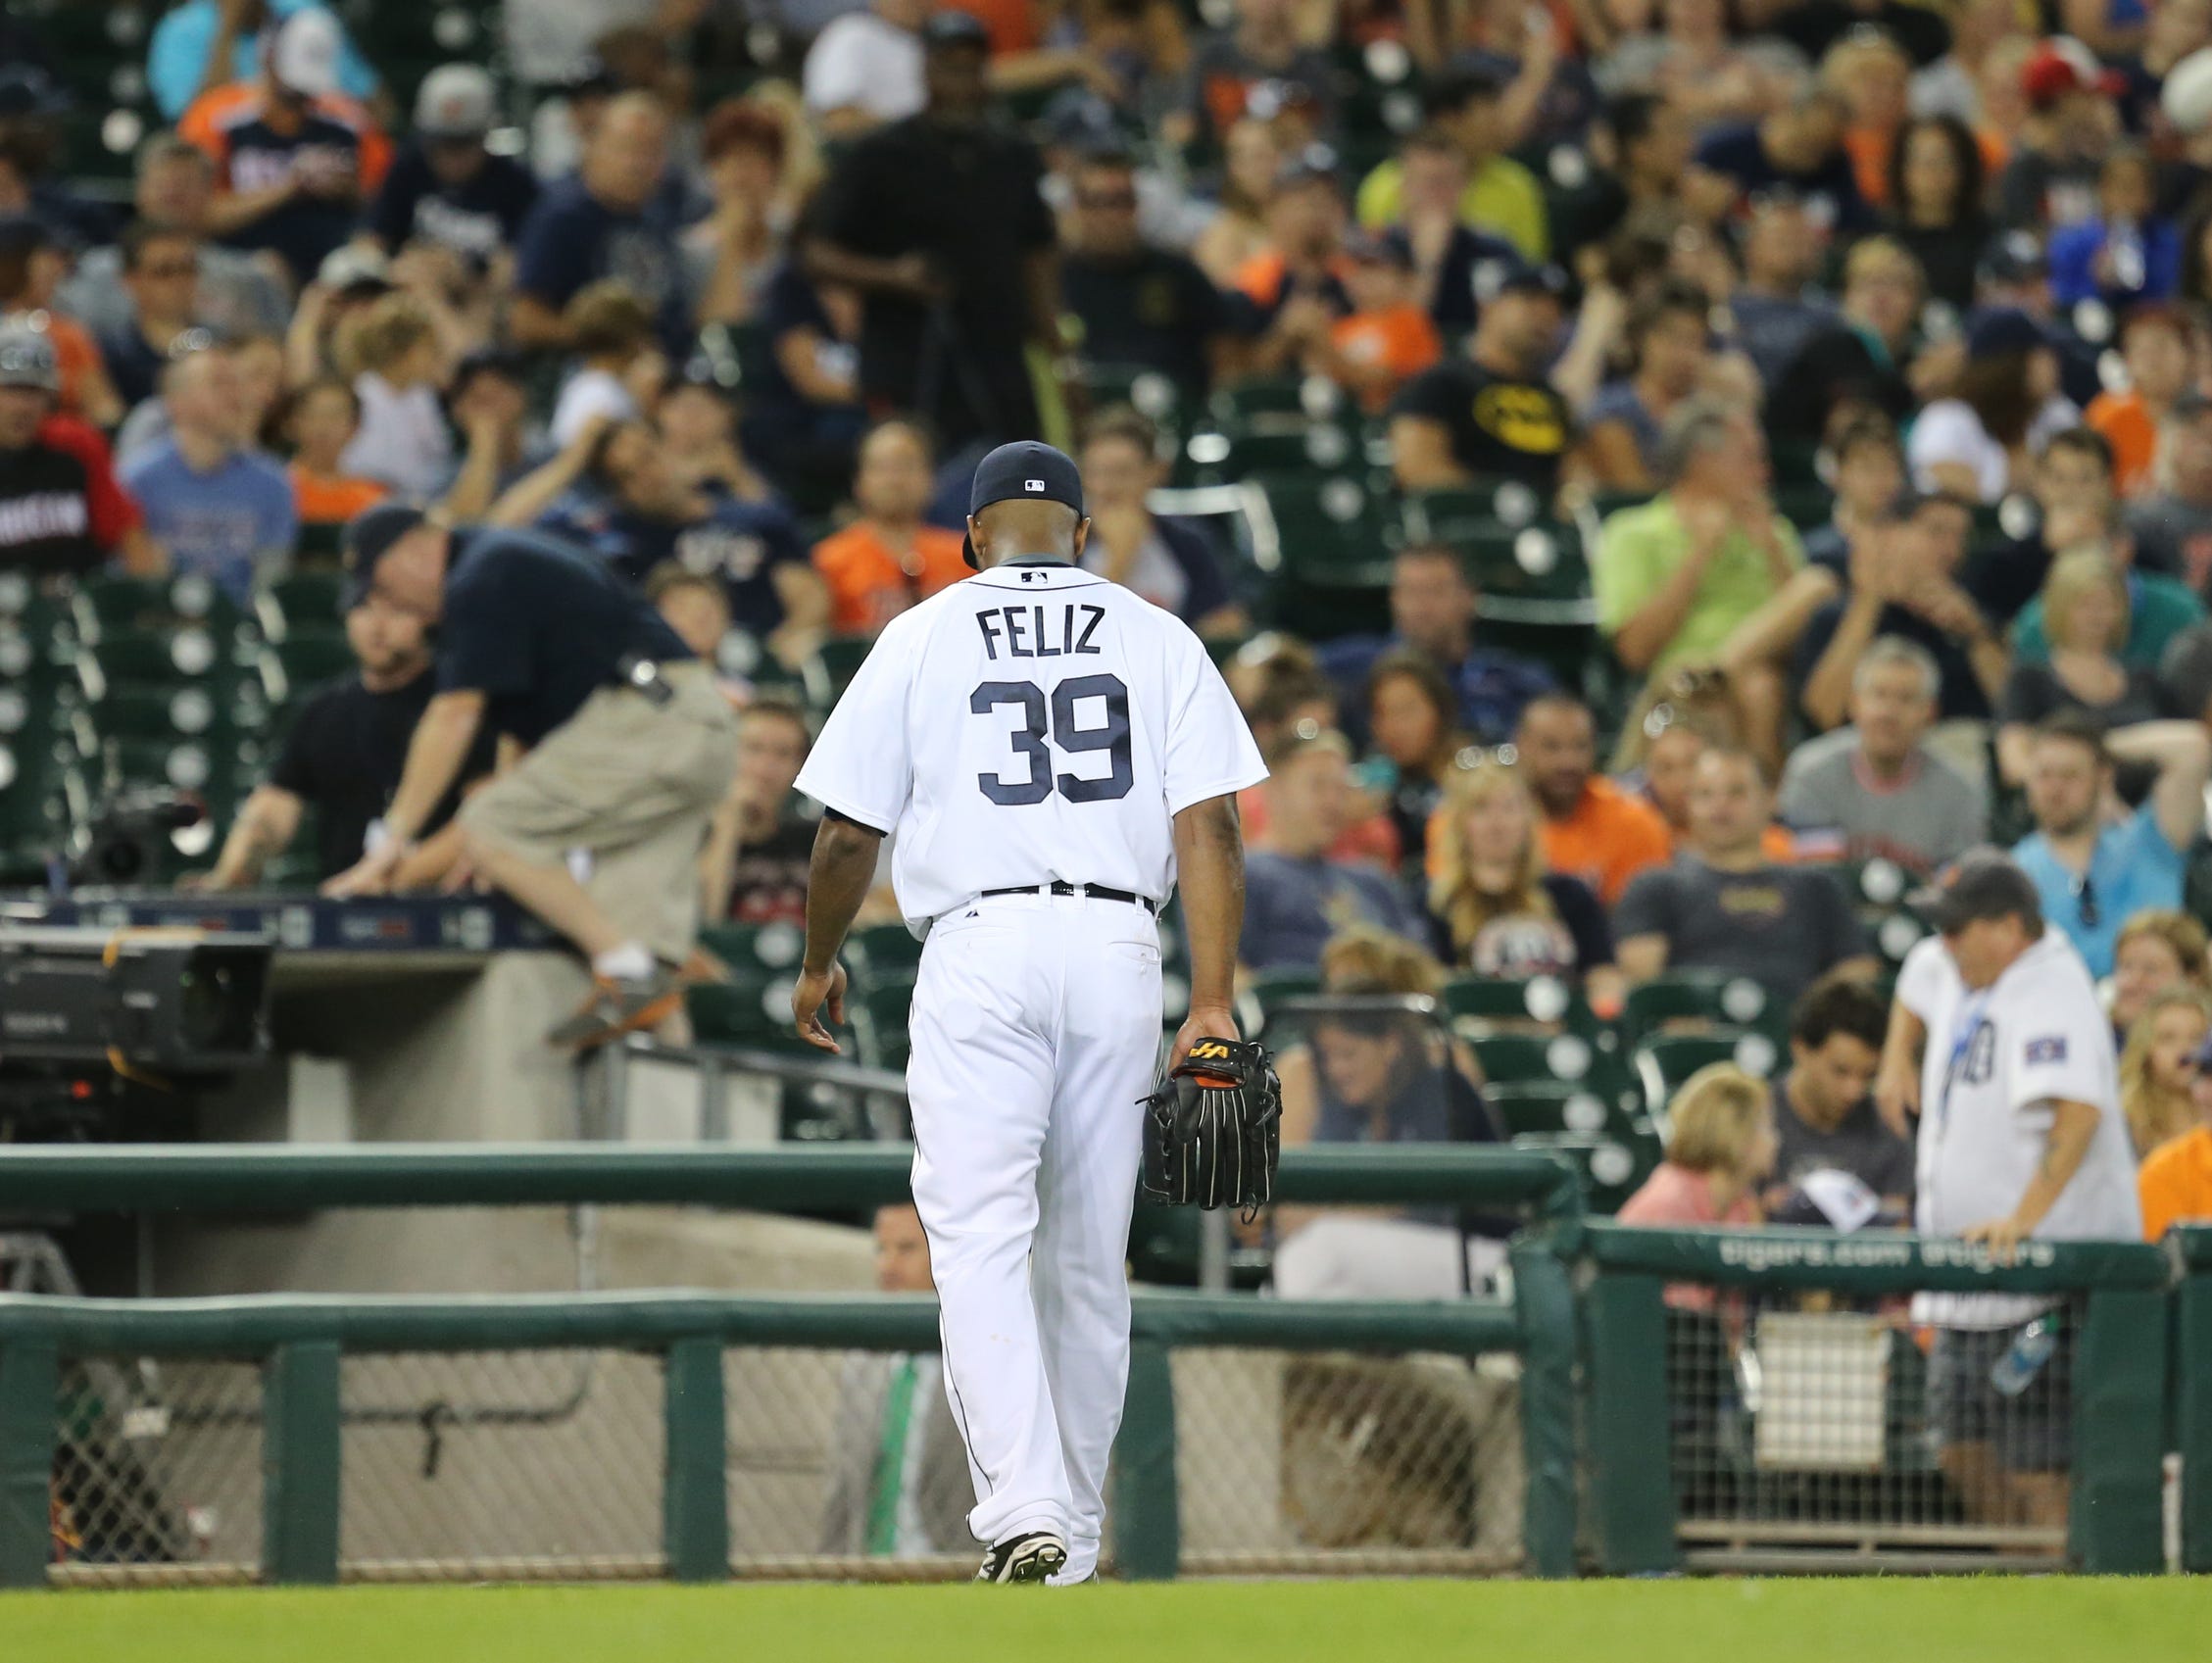 The Detroit Tigers' Neftali Felz walks off the field after giving up a grand slam to the Seattle Mariners Franklin Gutierrez during eighth inning action on Tuesday, July 21, 2015 at Comerica Park in Detroit.